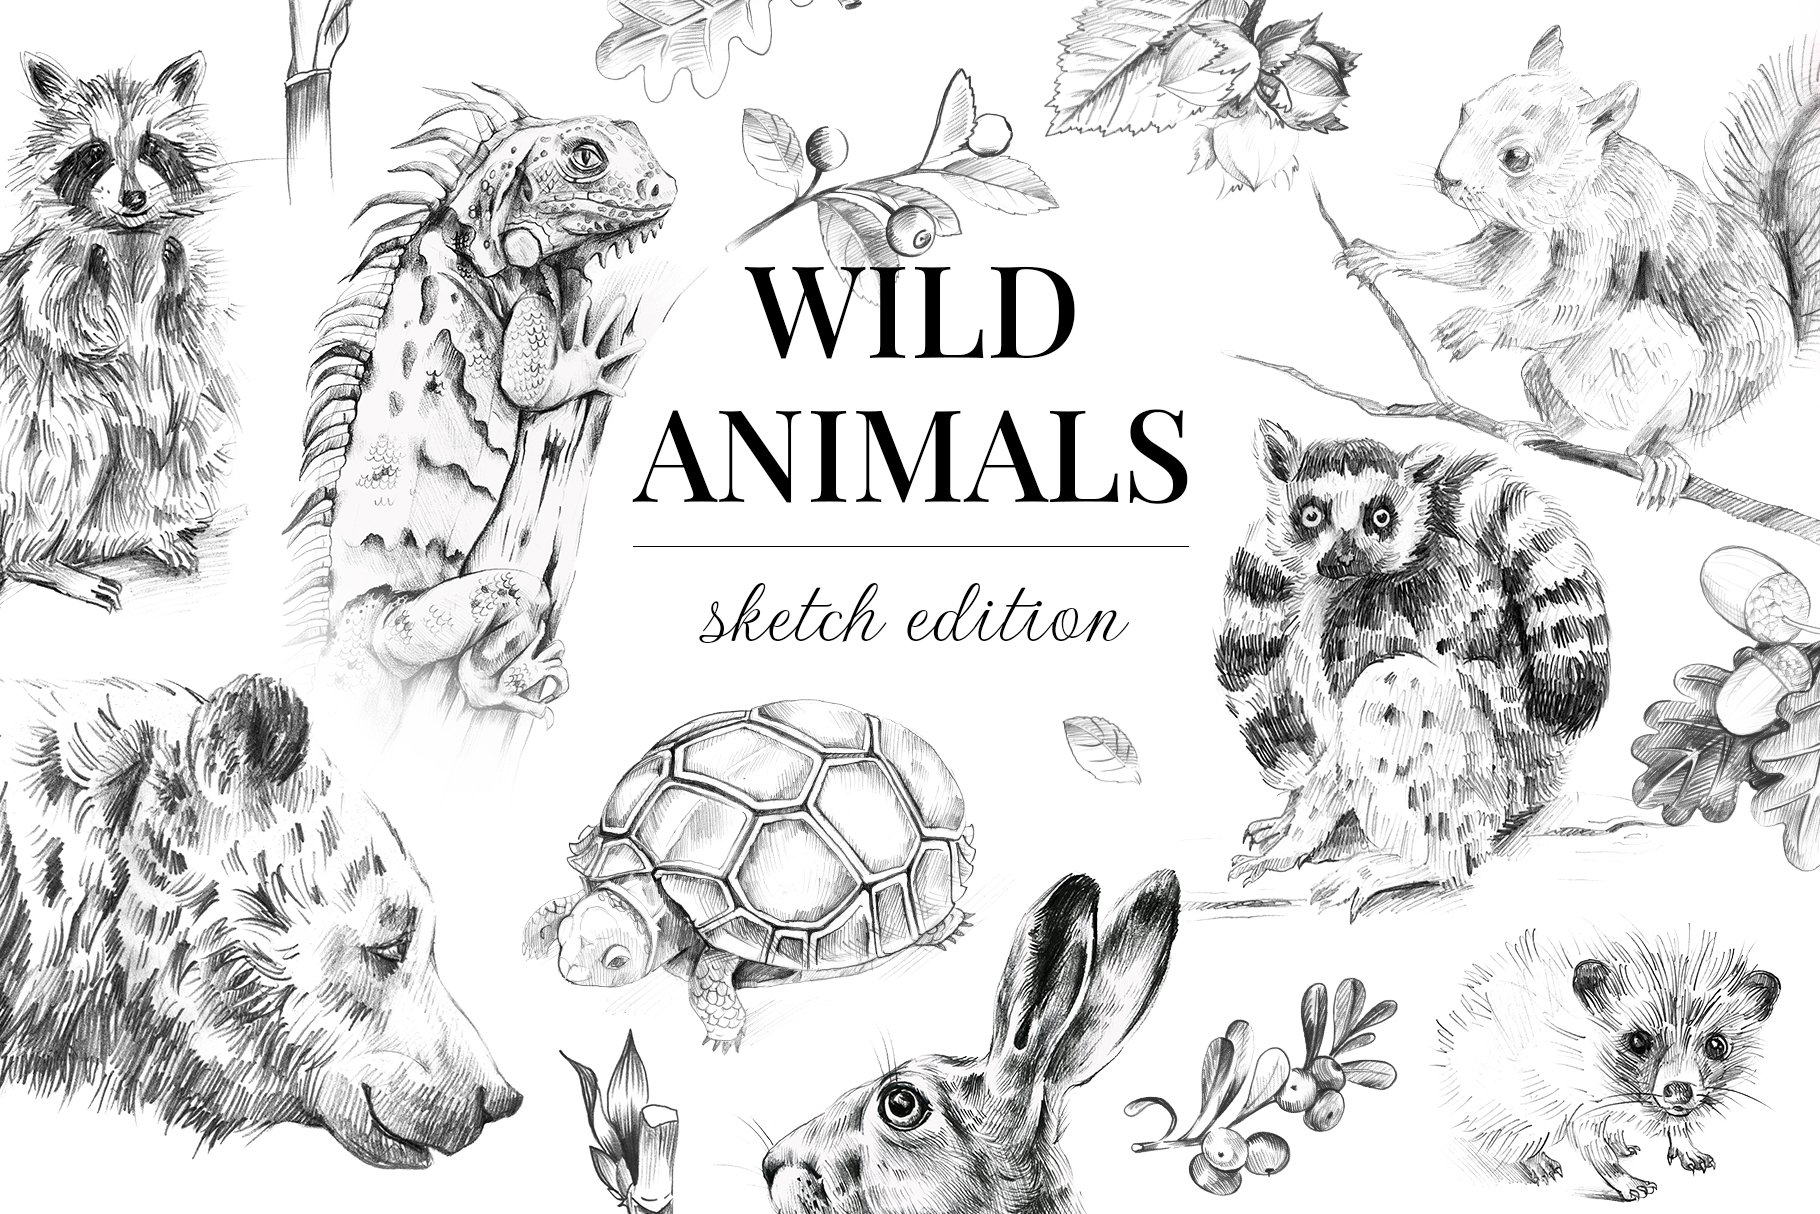 Wild animals. Sketch edition. 22 PNG cover image.